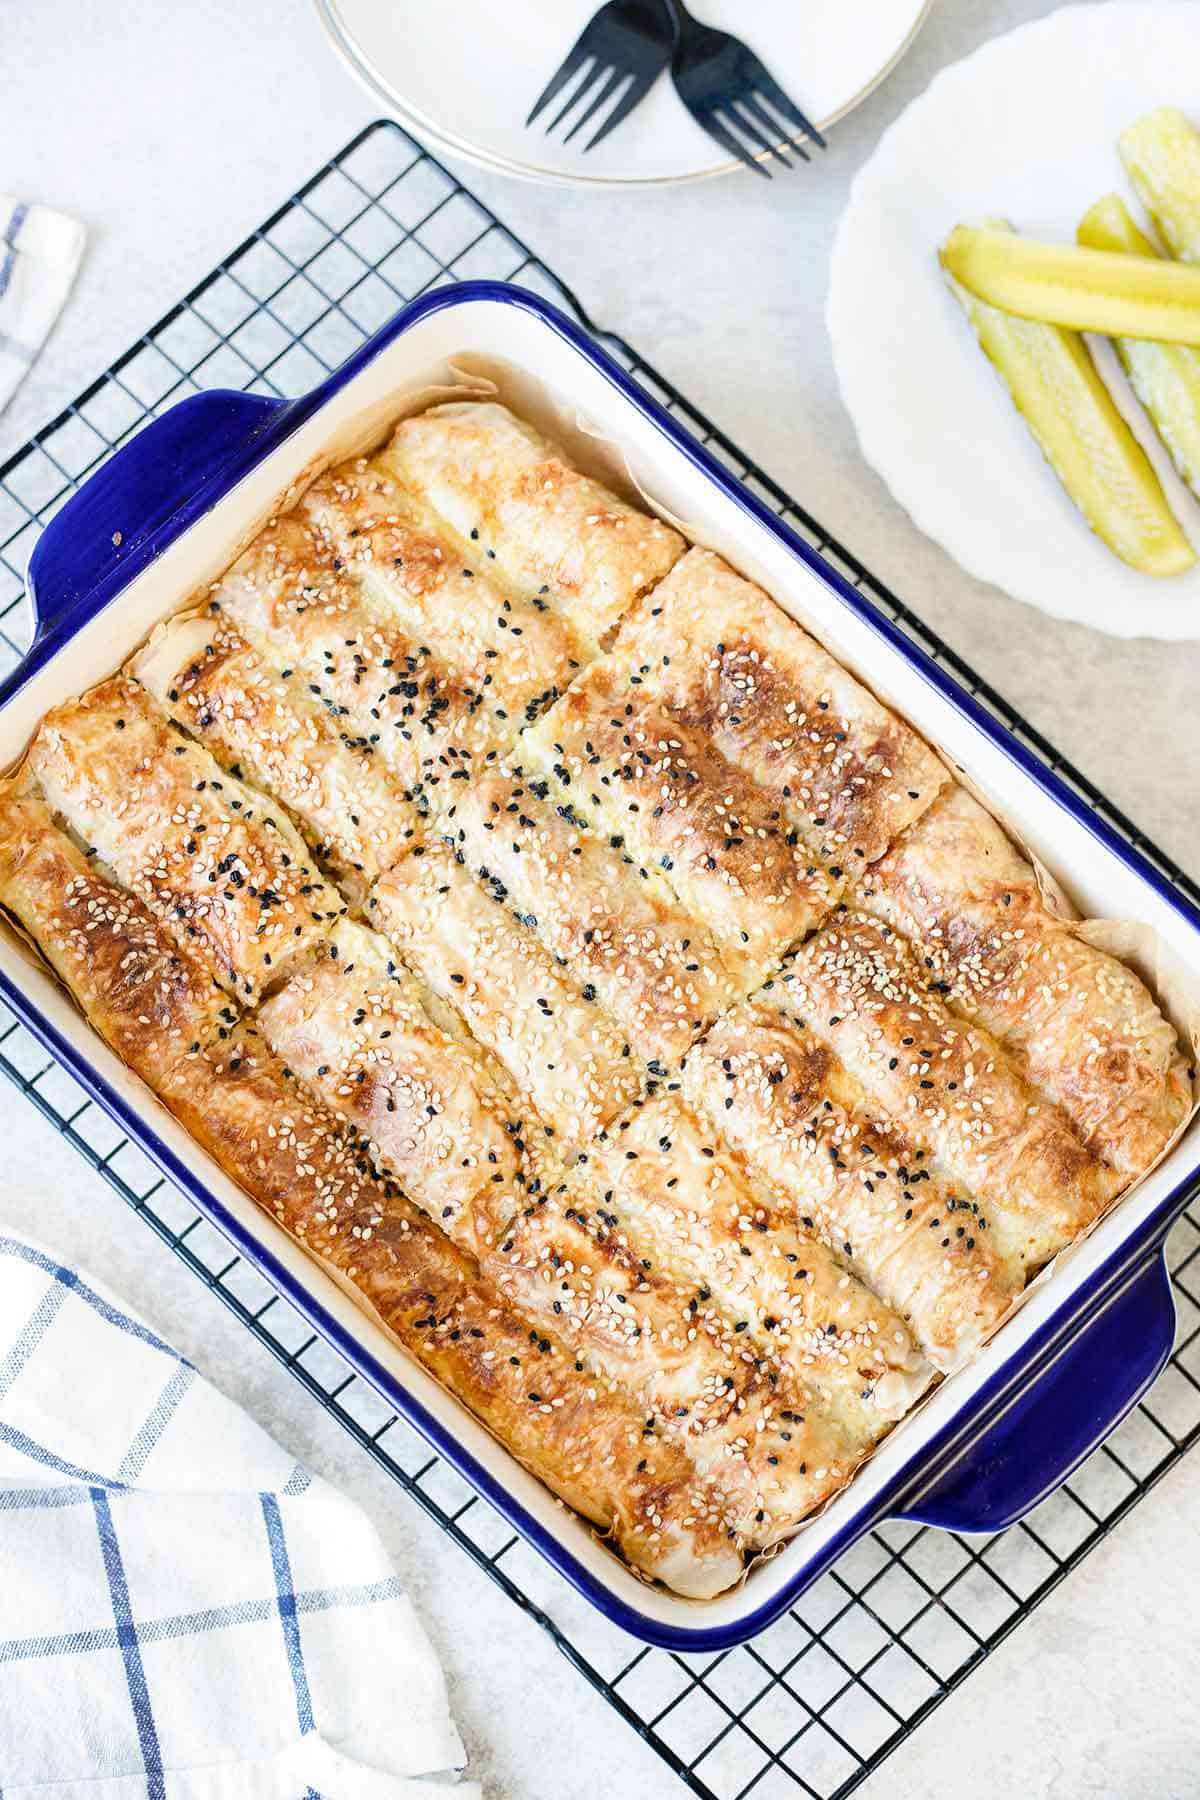 a whole baking dish filled with potato and onion rolls